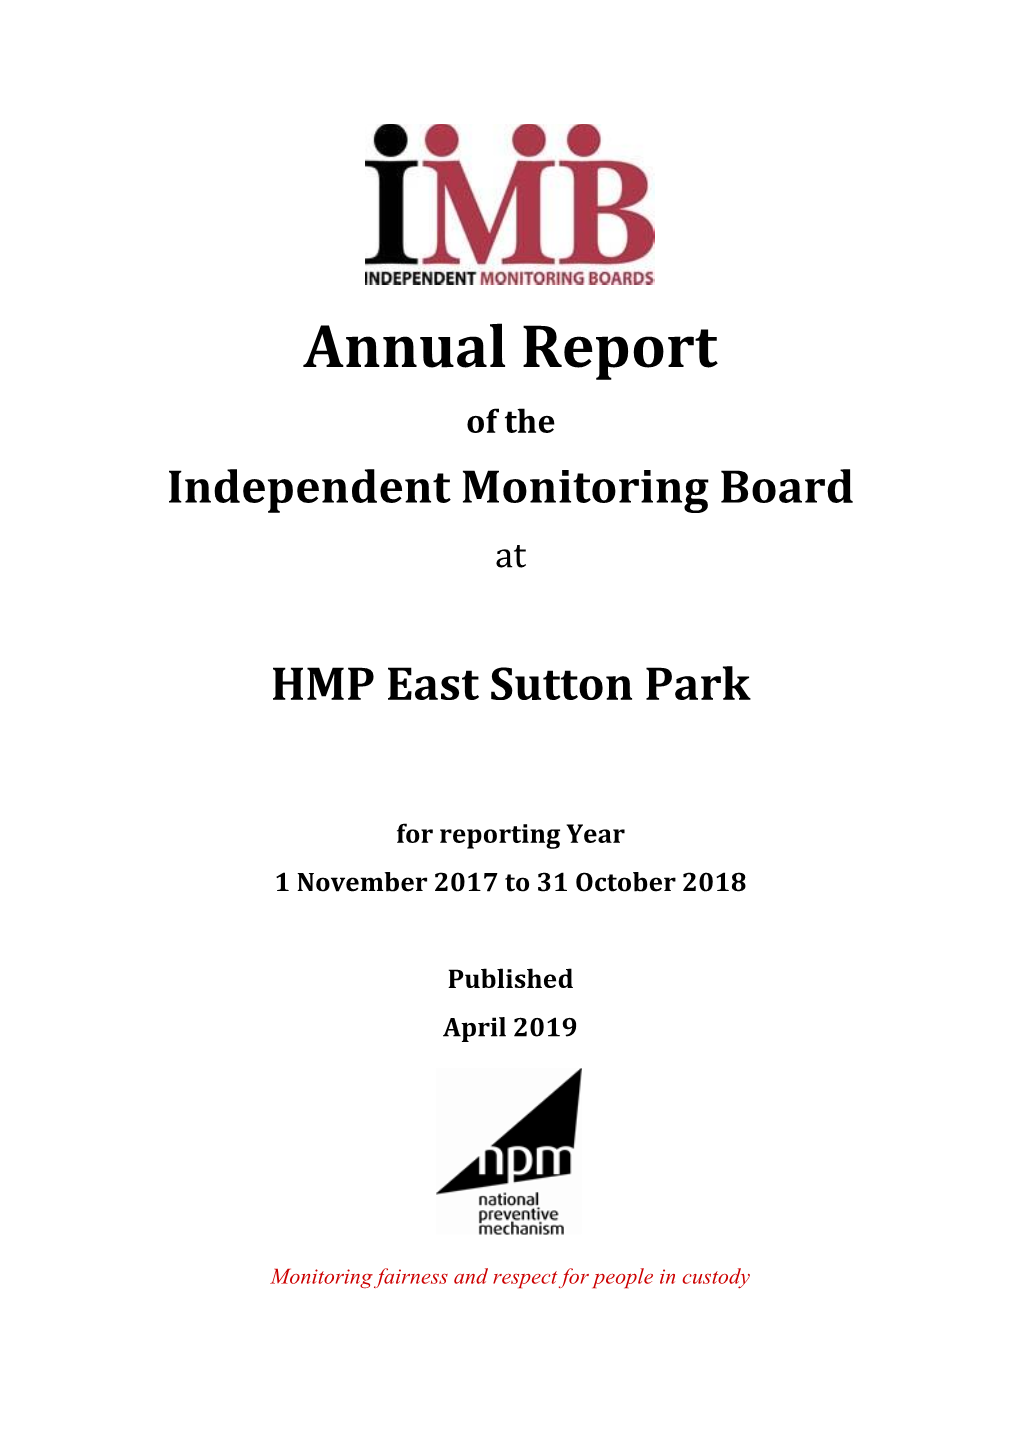 HMP East Sutton Park for Reporting Year 1 November